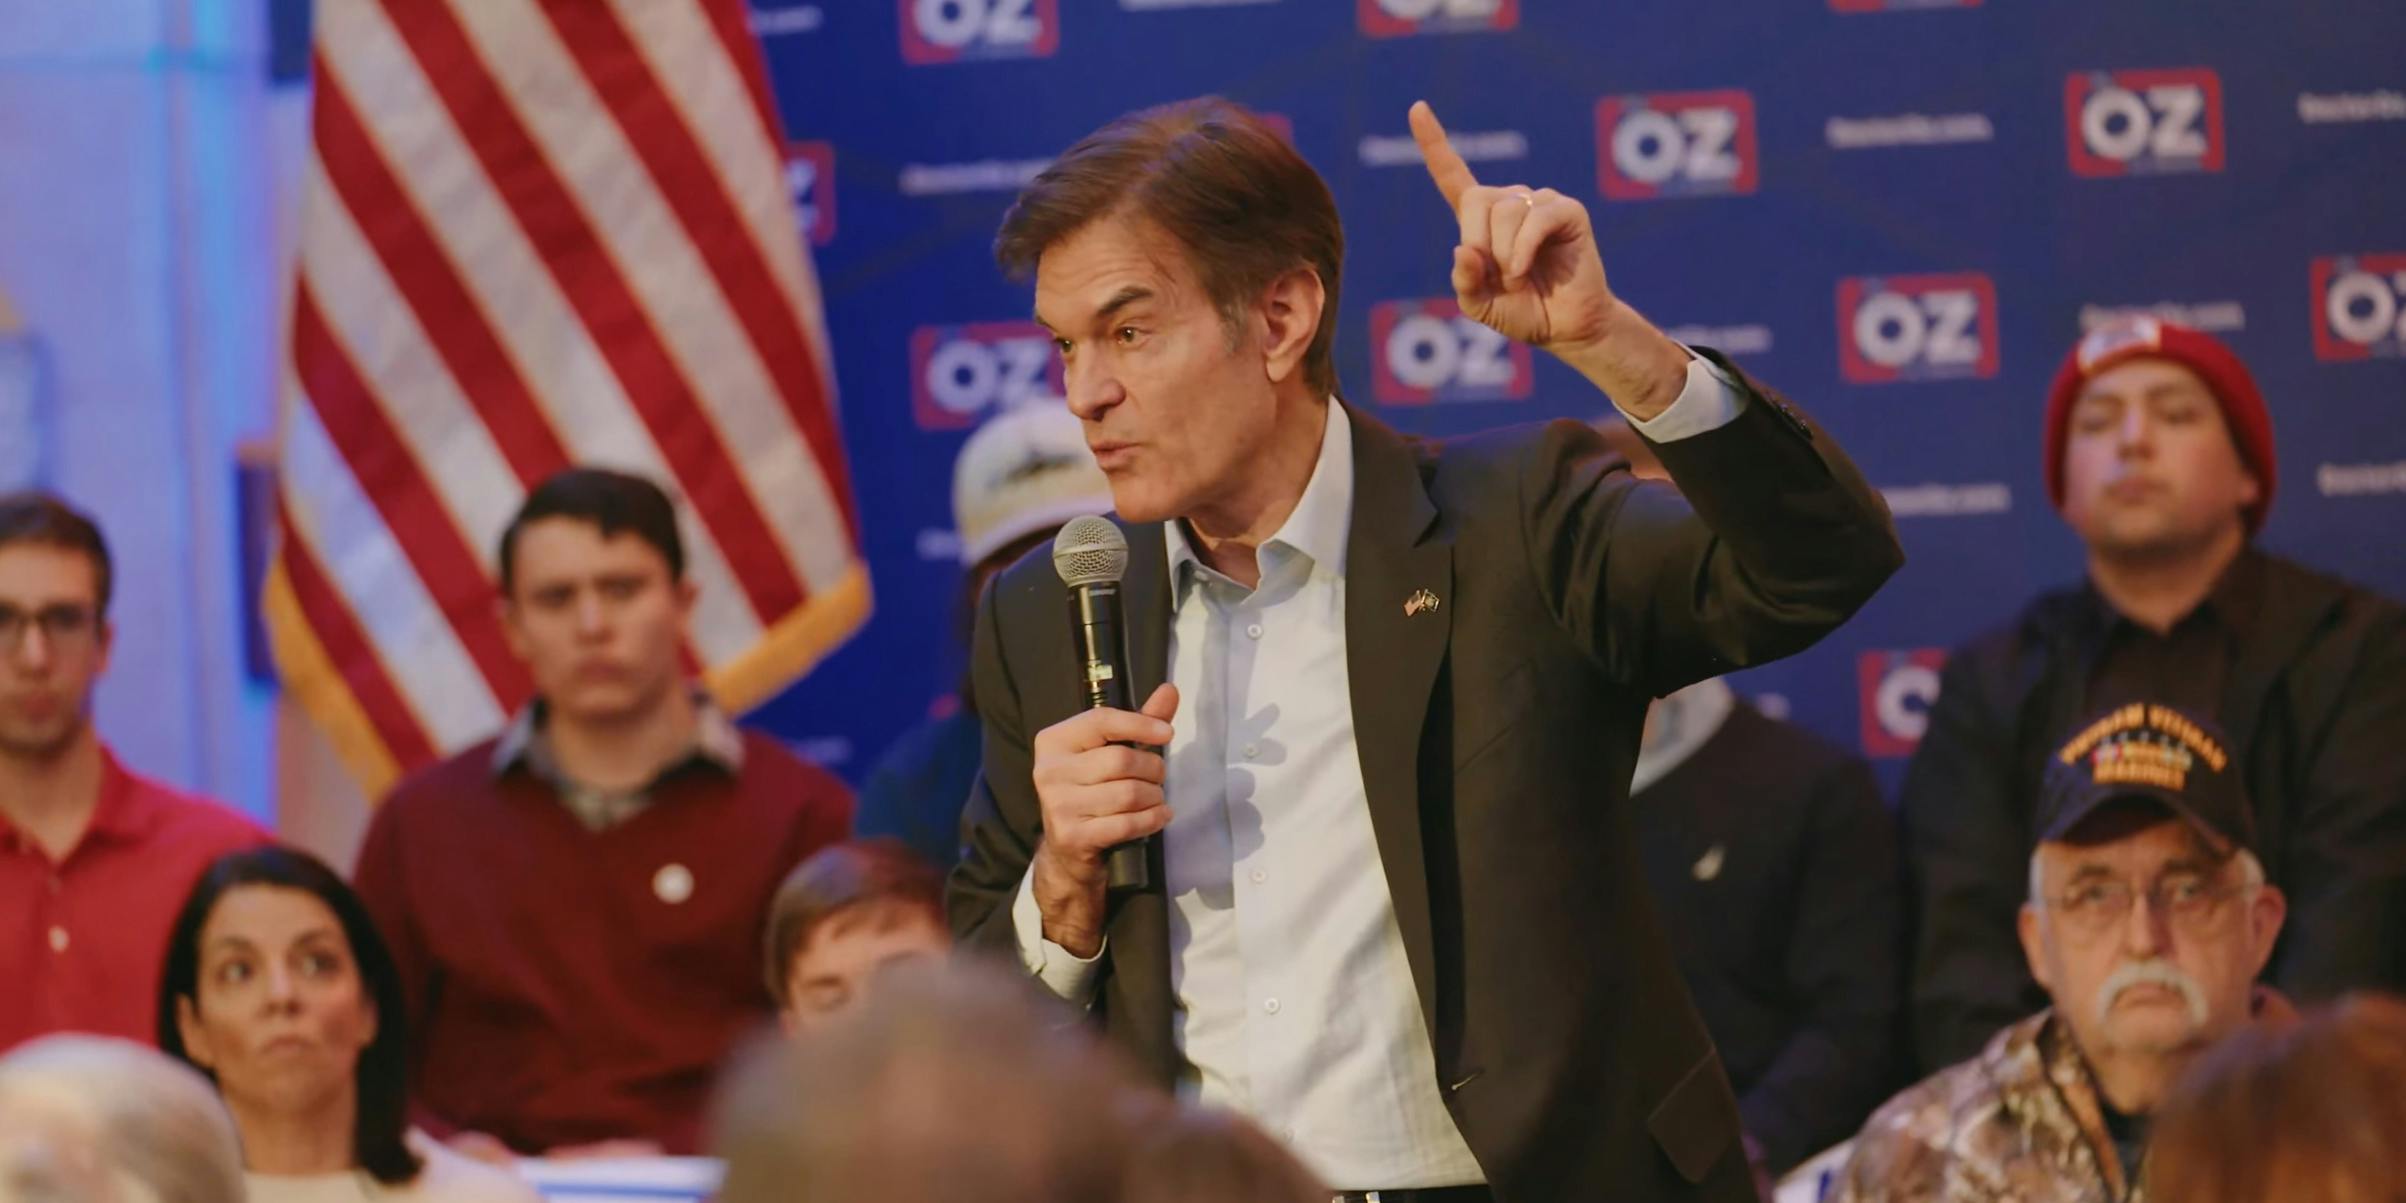 Dr. Oz speaking on the campaign trail.